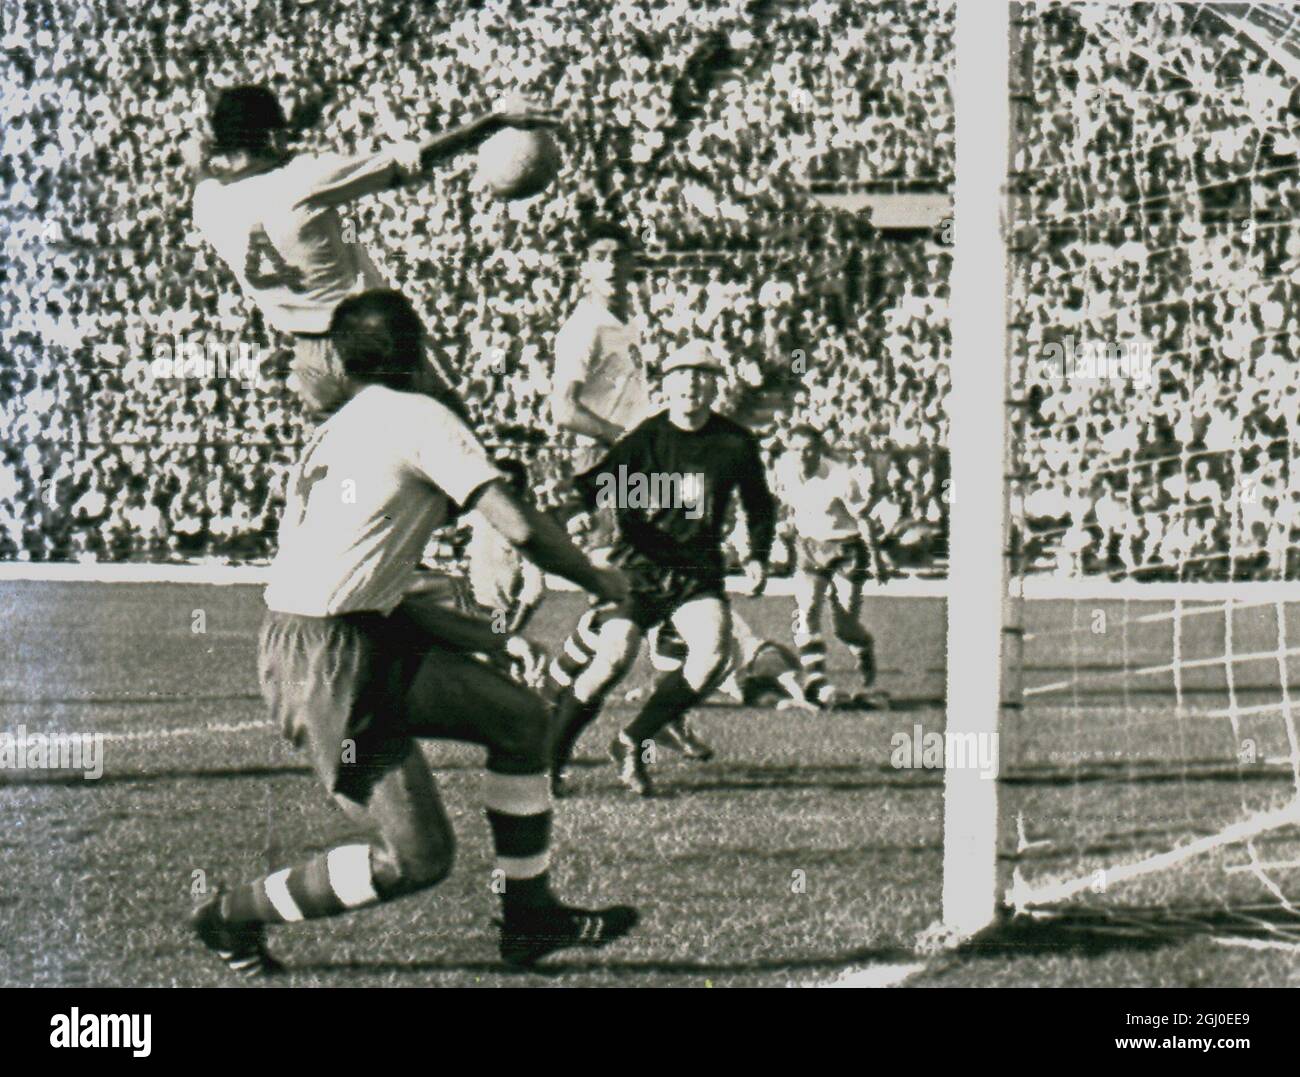 1962 World Cup Final Brazil v Czechoslovakia Brazil's Zito (No. 4) heads the ball past Czechslovakia's Novak (No. 4 foreground) and goalkeeper Schroif to put Brazil one goal ahead in the 67th minute of the World Cup soccer match at the National Staduim in Santiago, Chile. 18th June 1962. Stock Photo